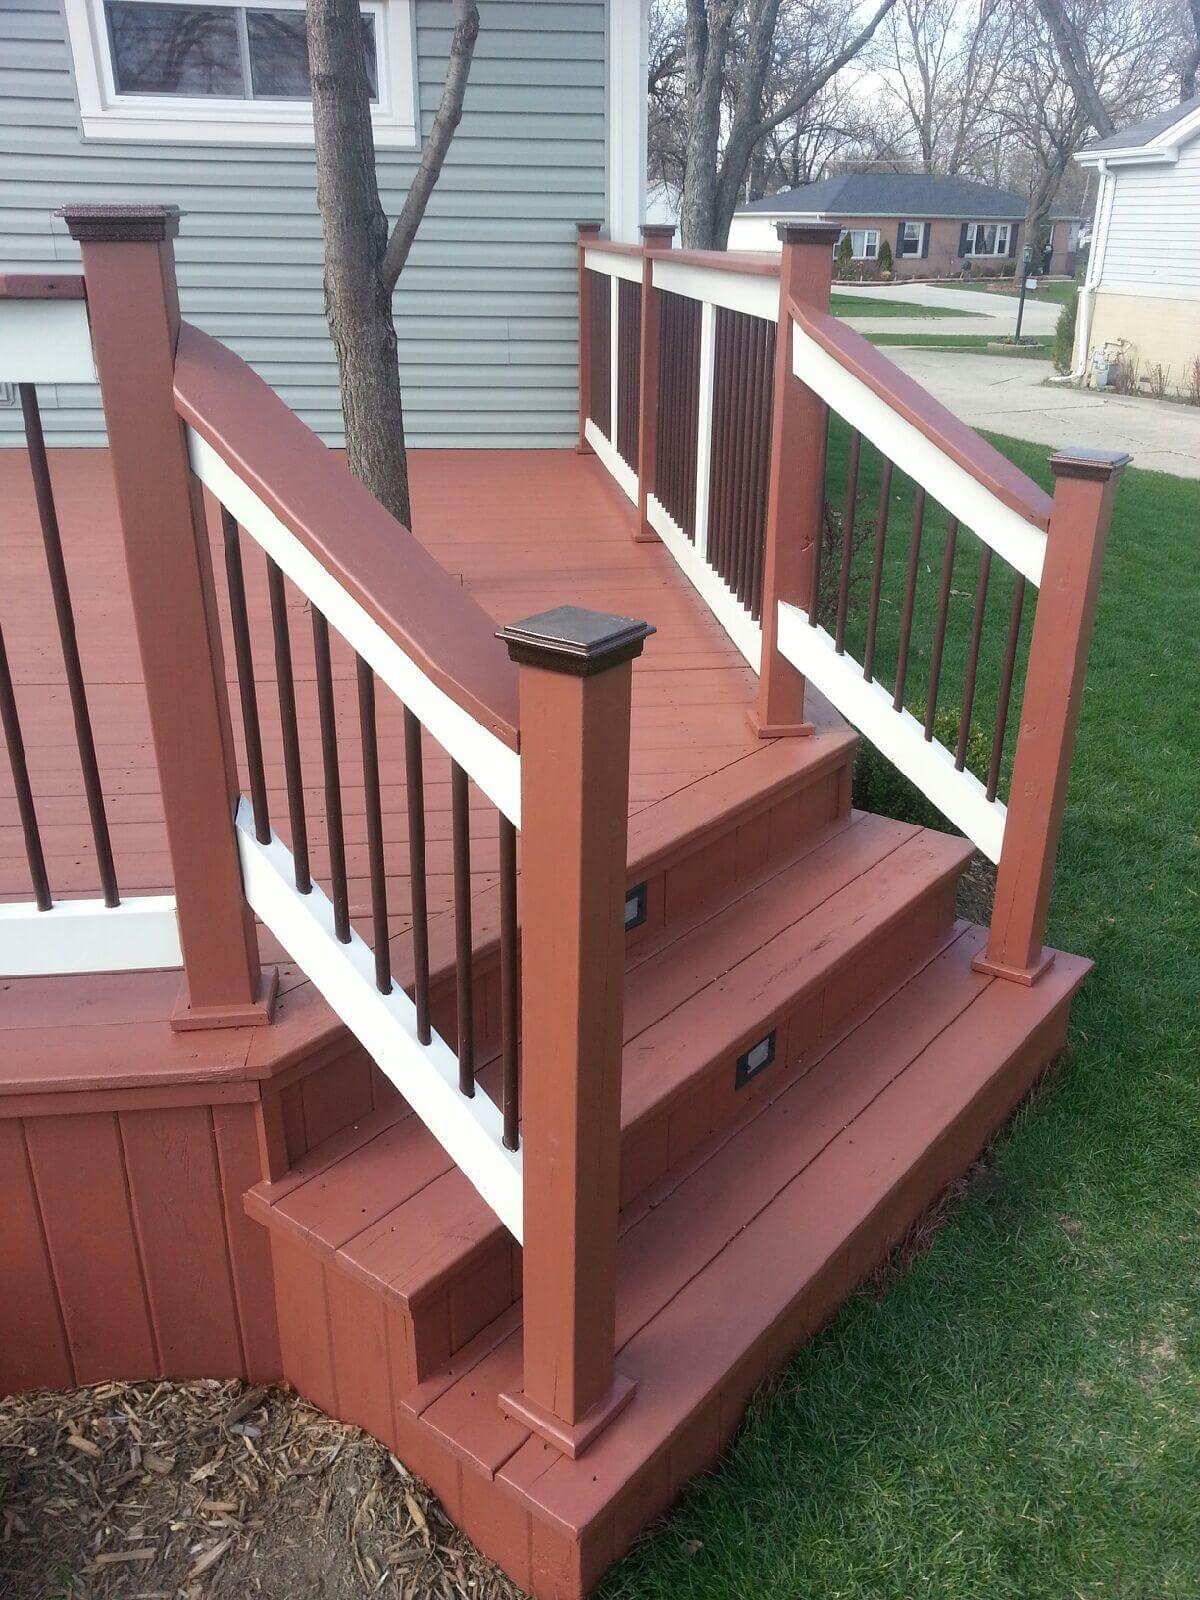 Repairs and maintenance for your deck, fence, and exterior wood staining. - Deck Staining Schiller Park - Deck Cleaning Services